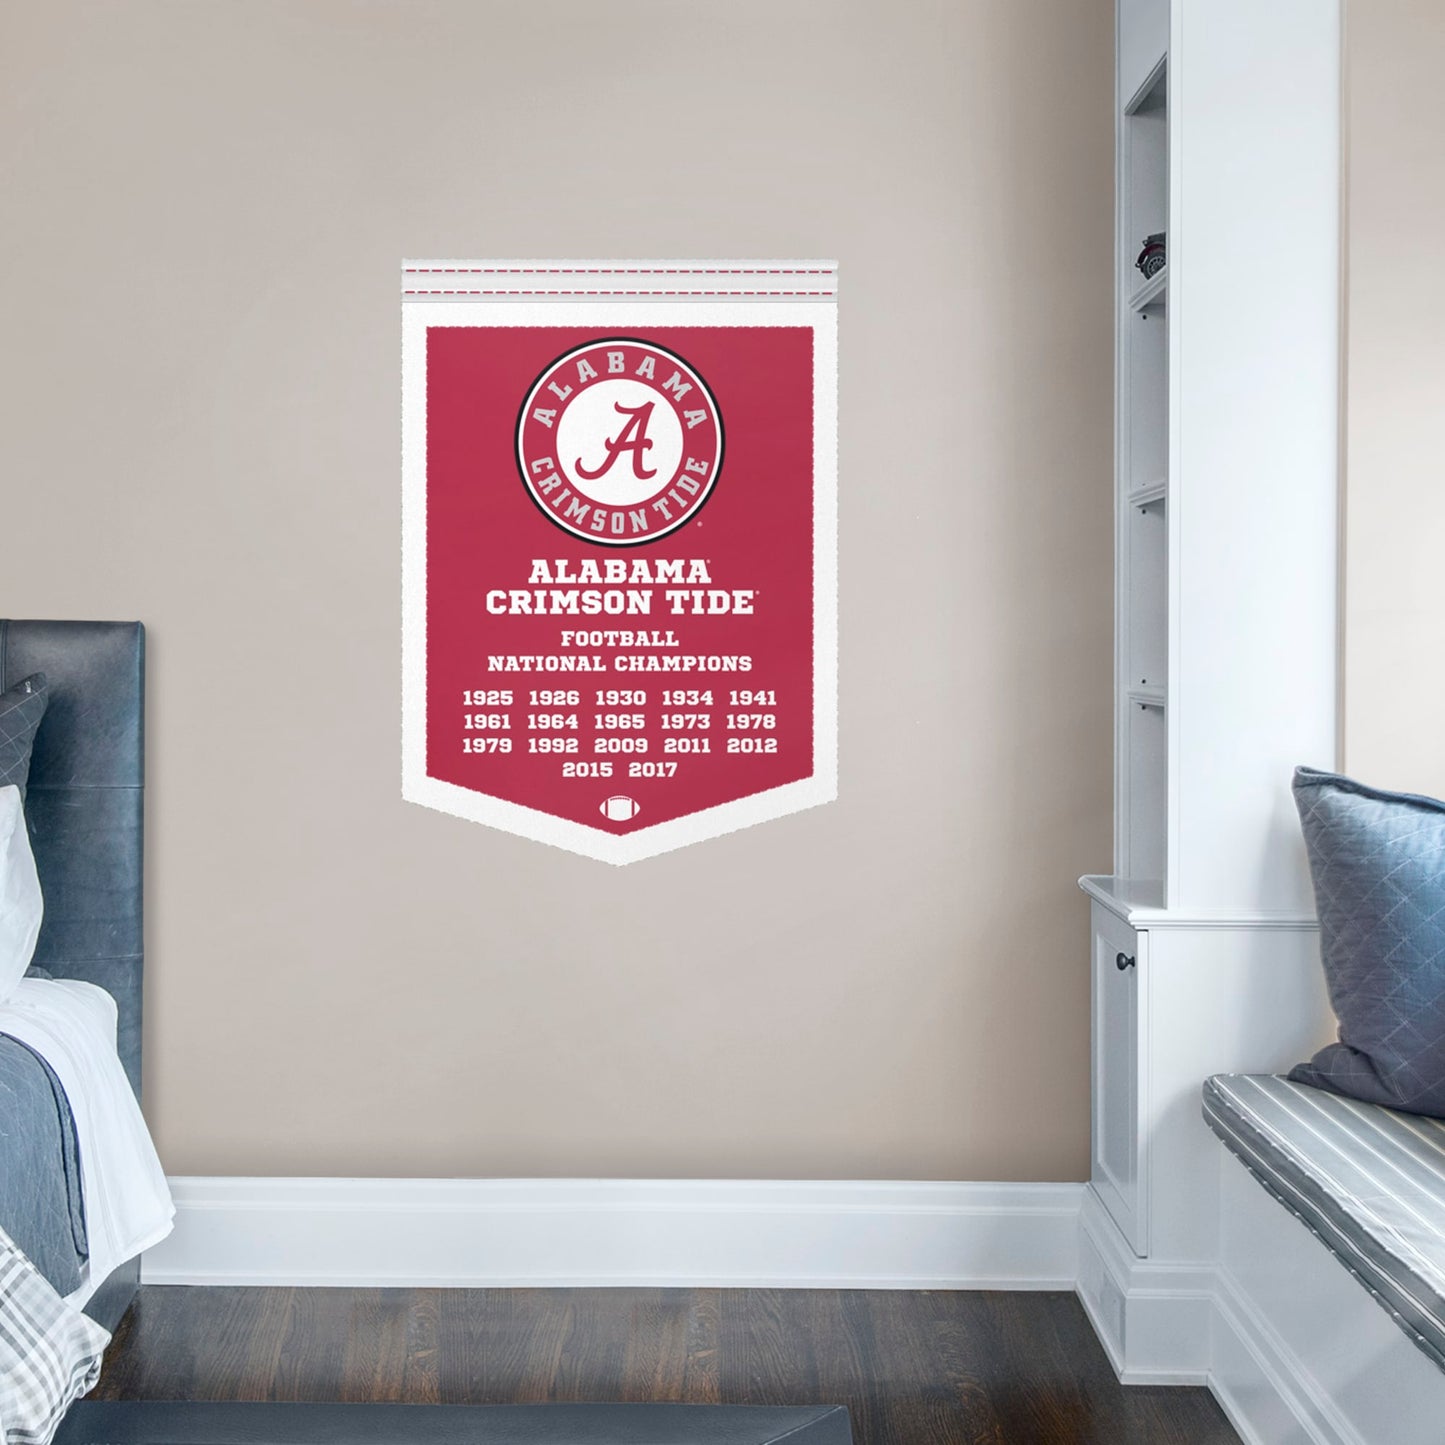 Alabama Crimson Tide: Football Championships Banner - Officially Licensed Removable Wall Decal